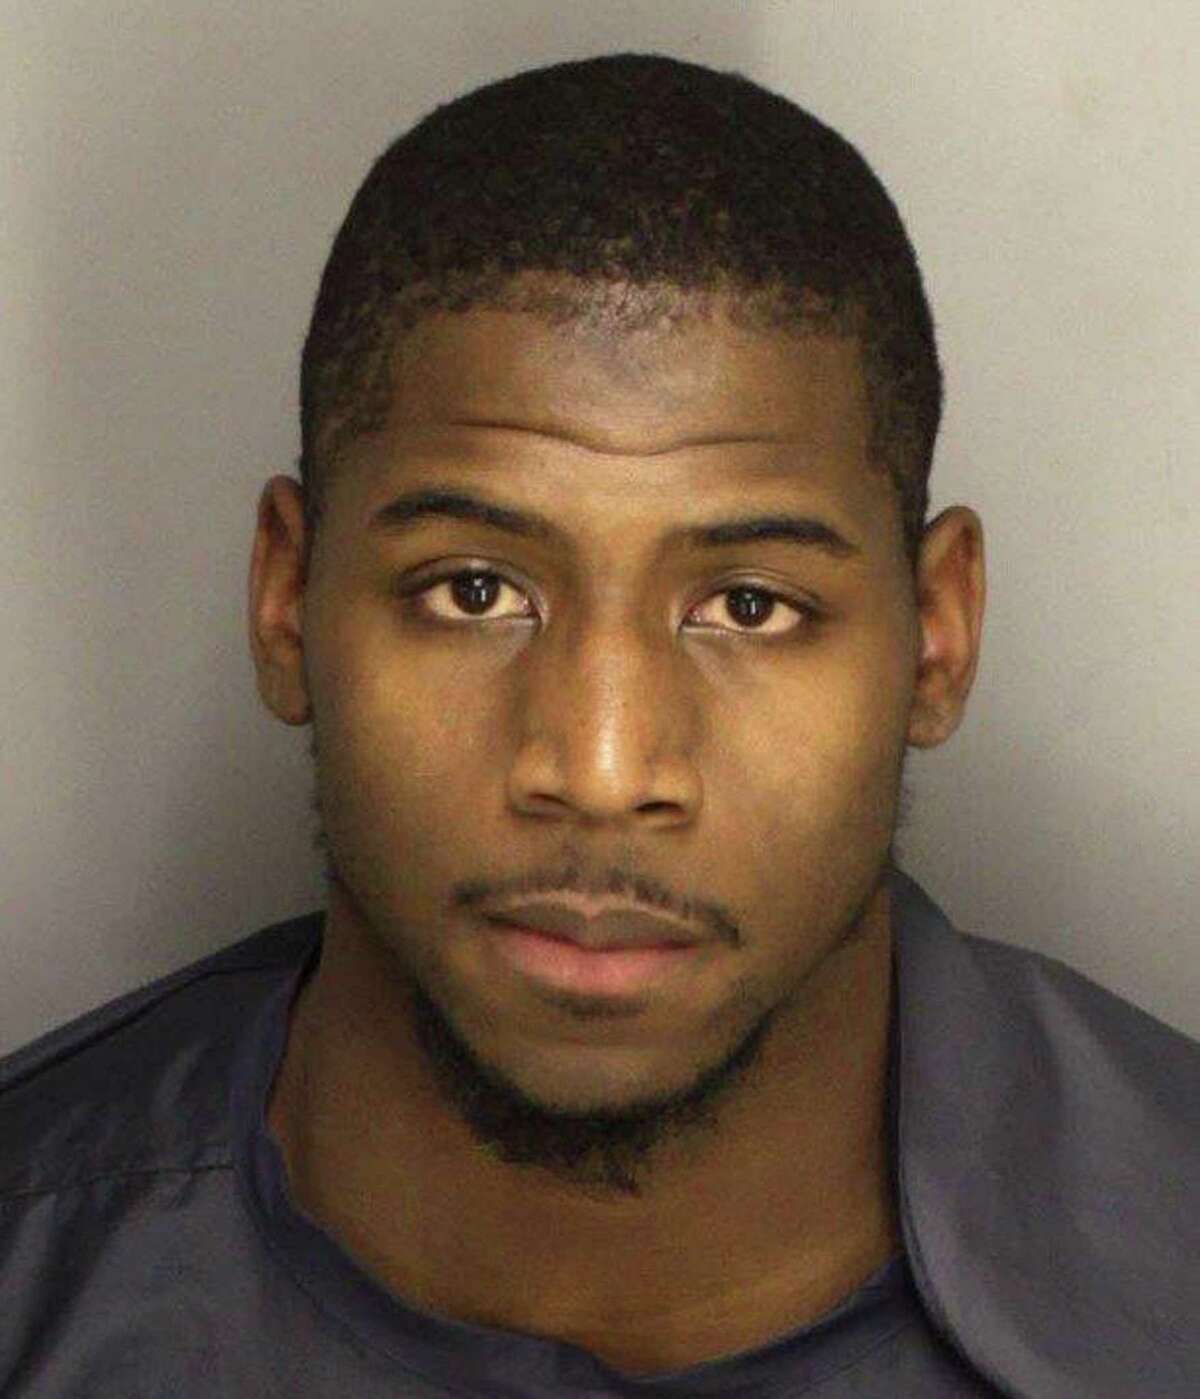 Alfonzo Dennard was drafted seven days after being charged with assault in 2012 in Nebraska.